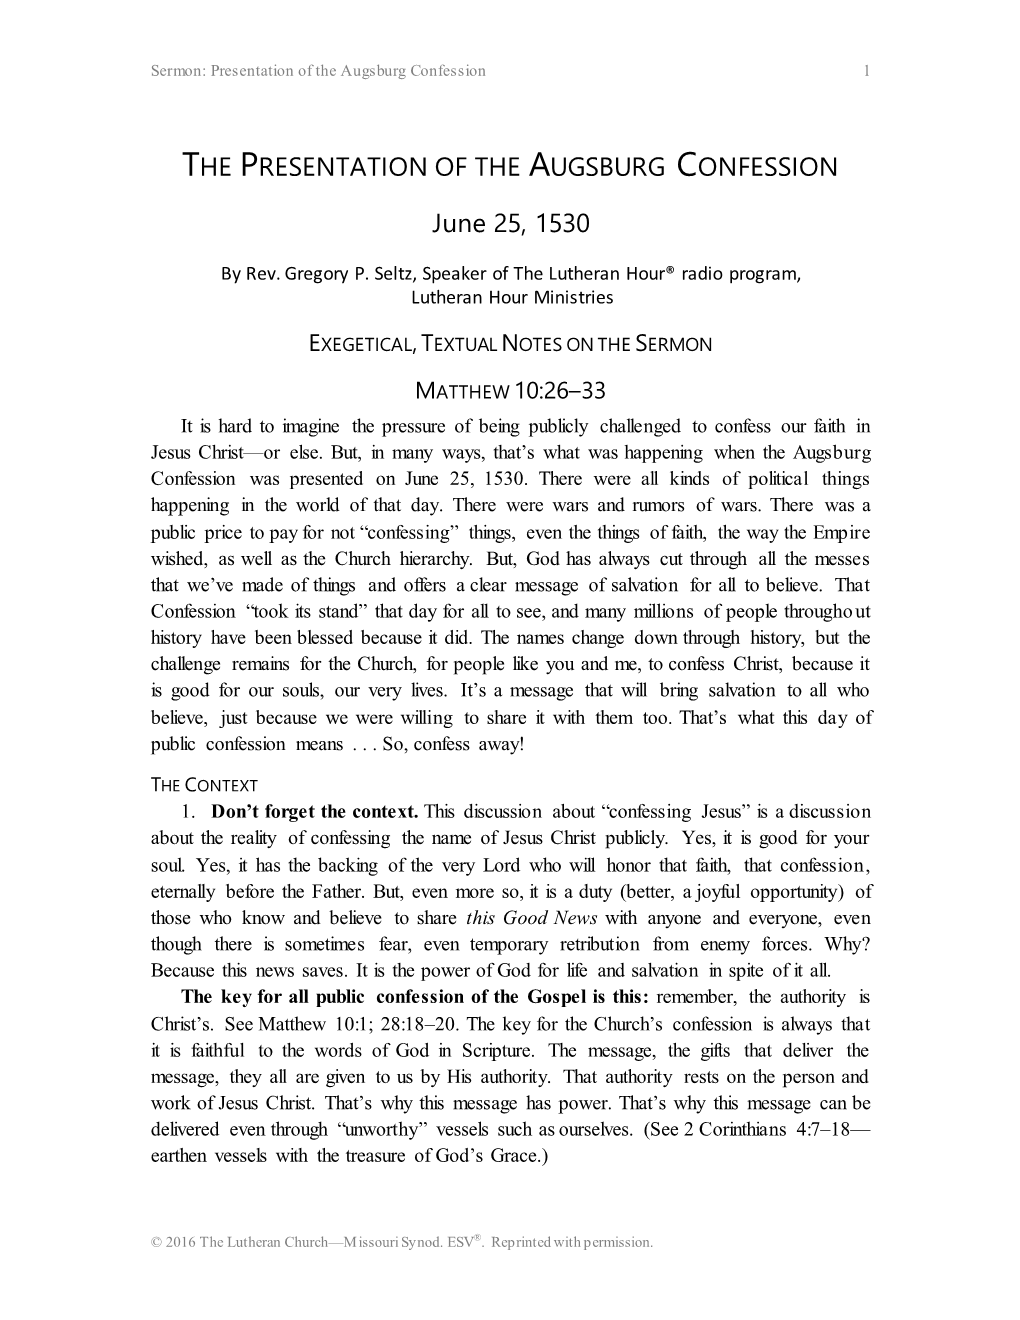 THE PRESENTATION of the AUGSBURG CONFESSION June